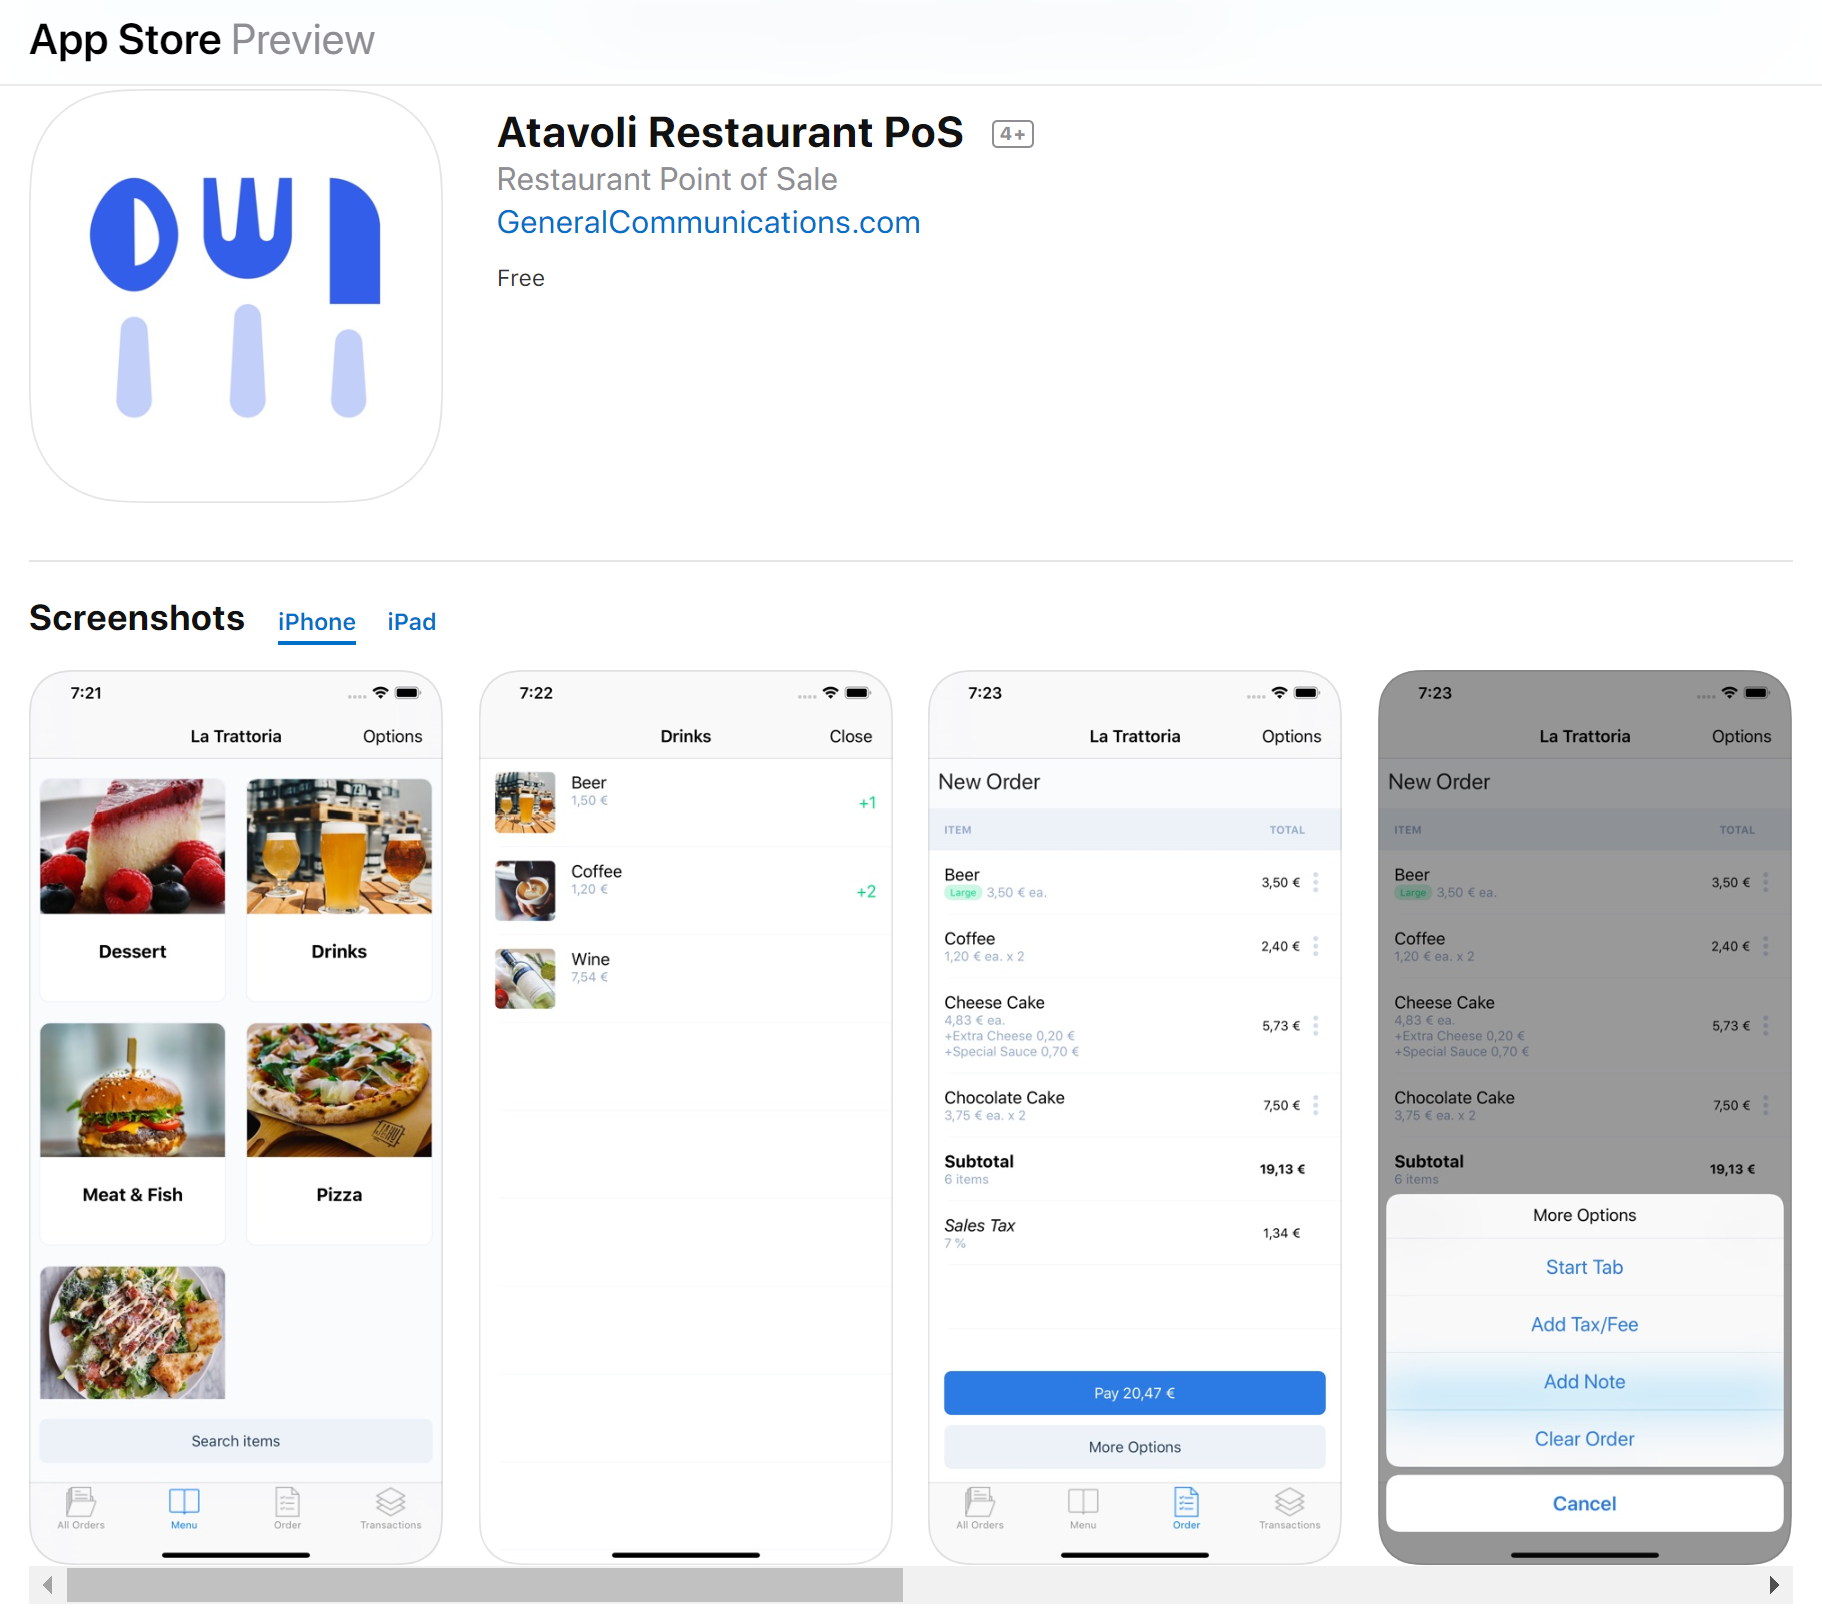 iOS iPad POS Hospitality Industry for Restaurants, Bars, Cafes, Bistros, Diners, Bakeries, Food Trucks, Hotels, Bed and Breakfasts, Resorts, Night Clubs | Download Restaurant POS on the App Store, Our touch interface is designed IOS iPad or iPhone Restaurant POS